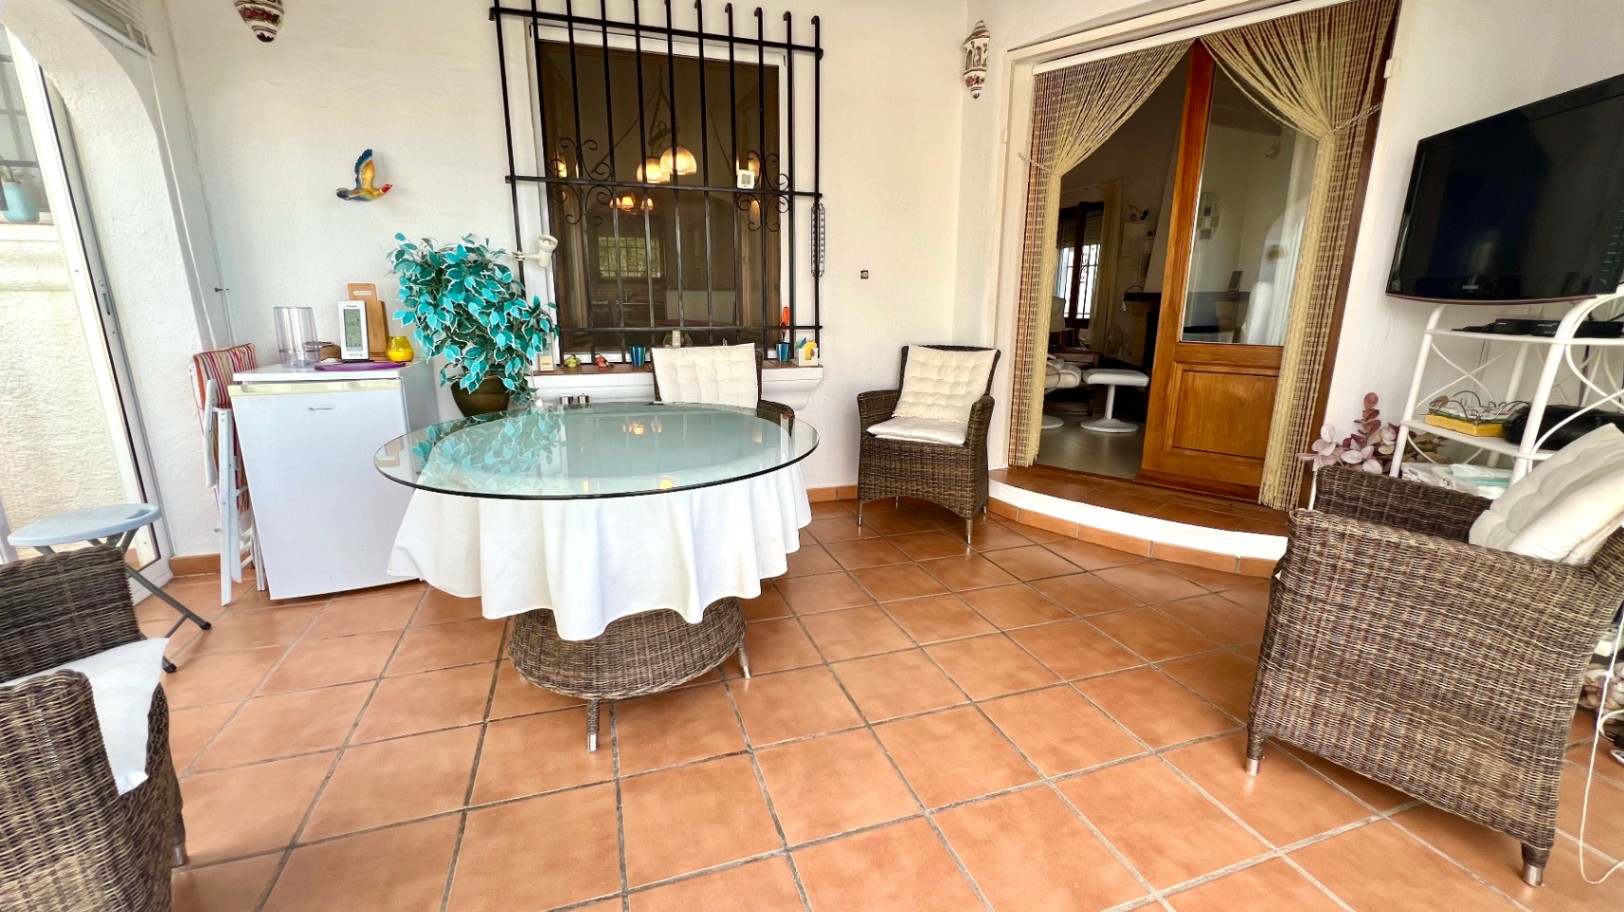 Beautiful 2 bedroom villa with sea views, swimming pool, central heating, carport, and much more.